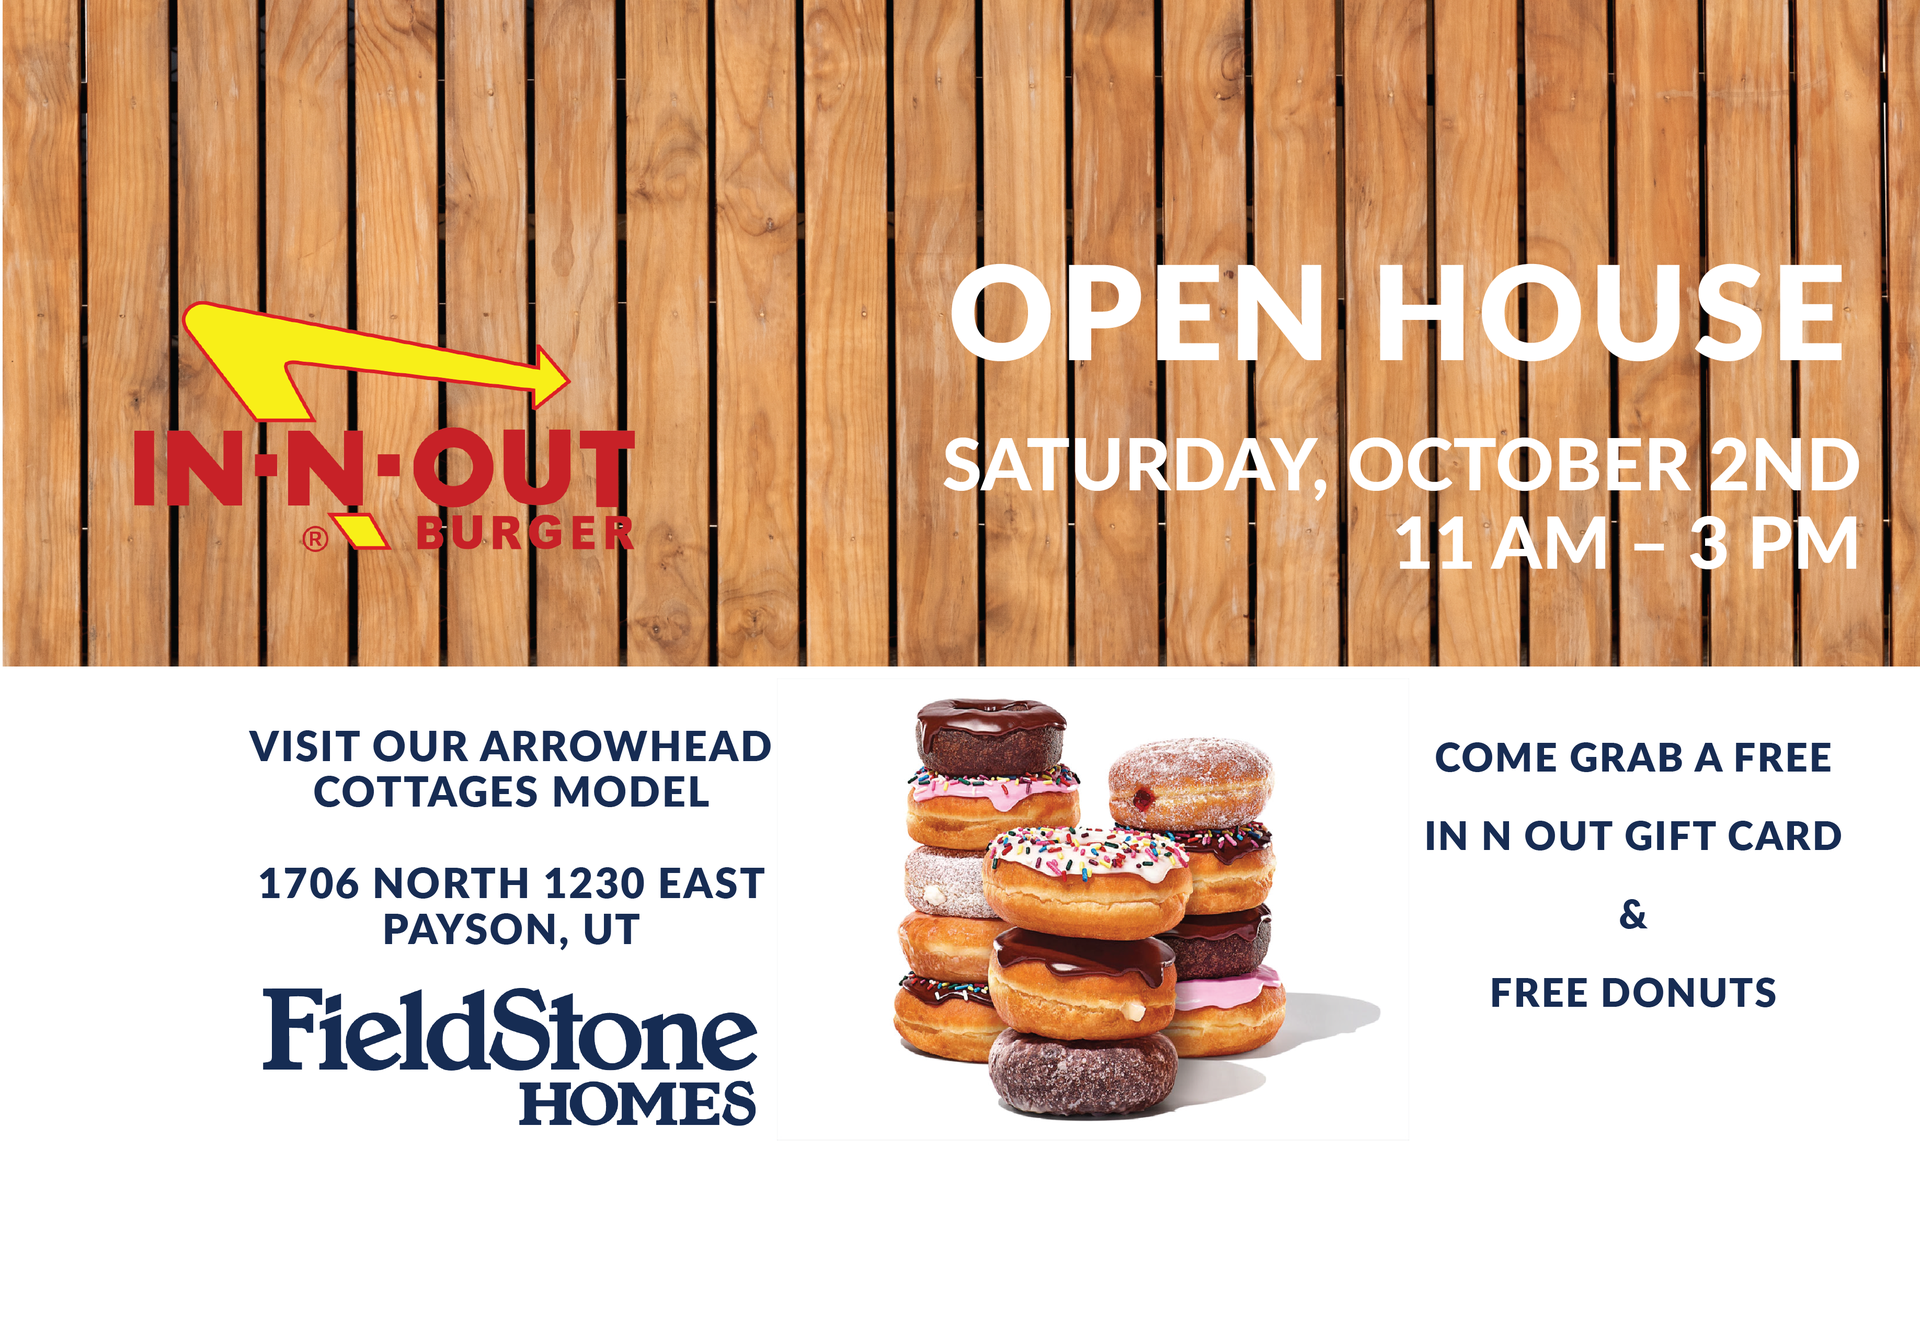 OPEN HOUSE  OCT 2ND – FREE Gift Cards & Donuts